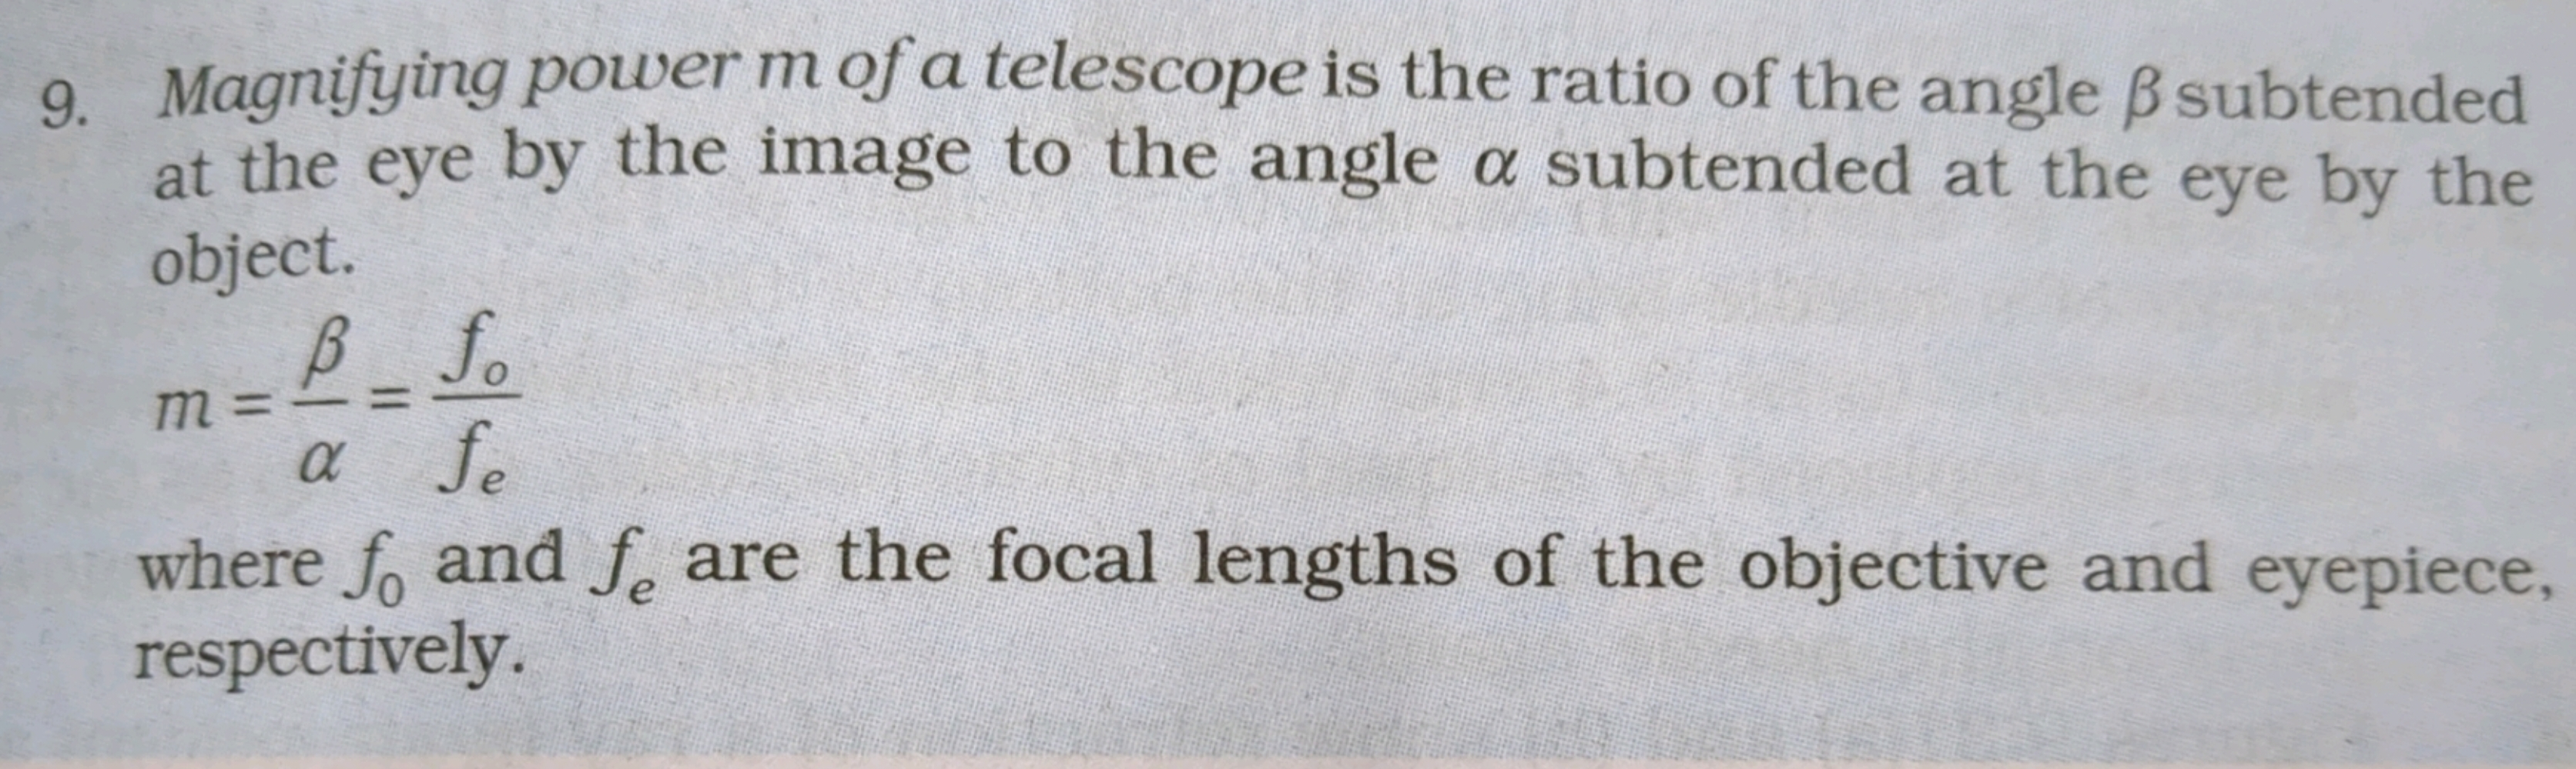 9. Magnifying power m of a telescope is the ratio of the angle β subte